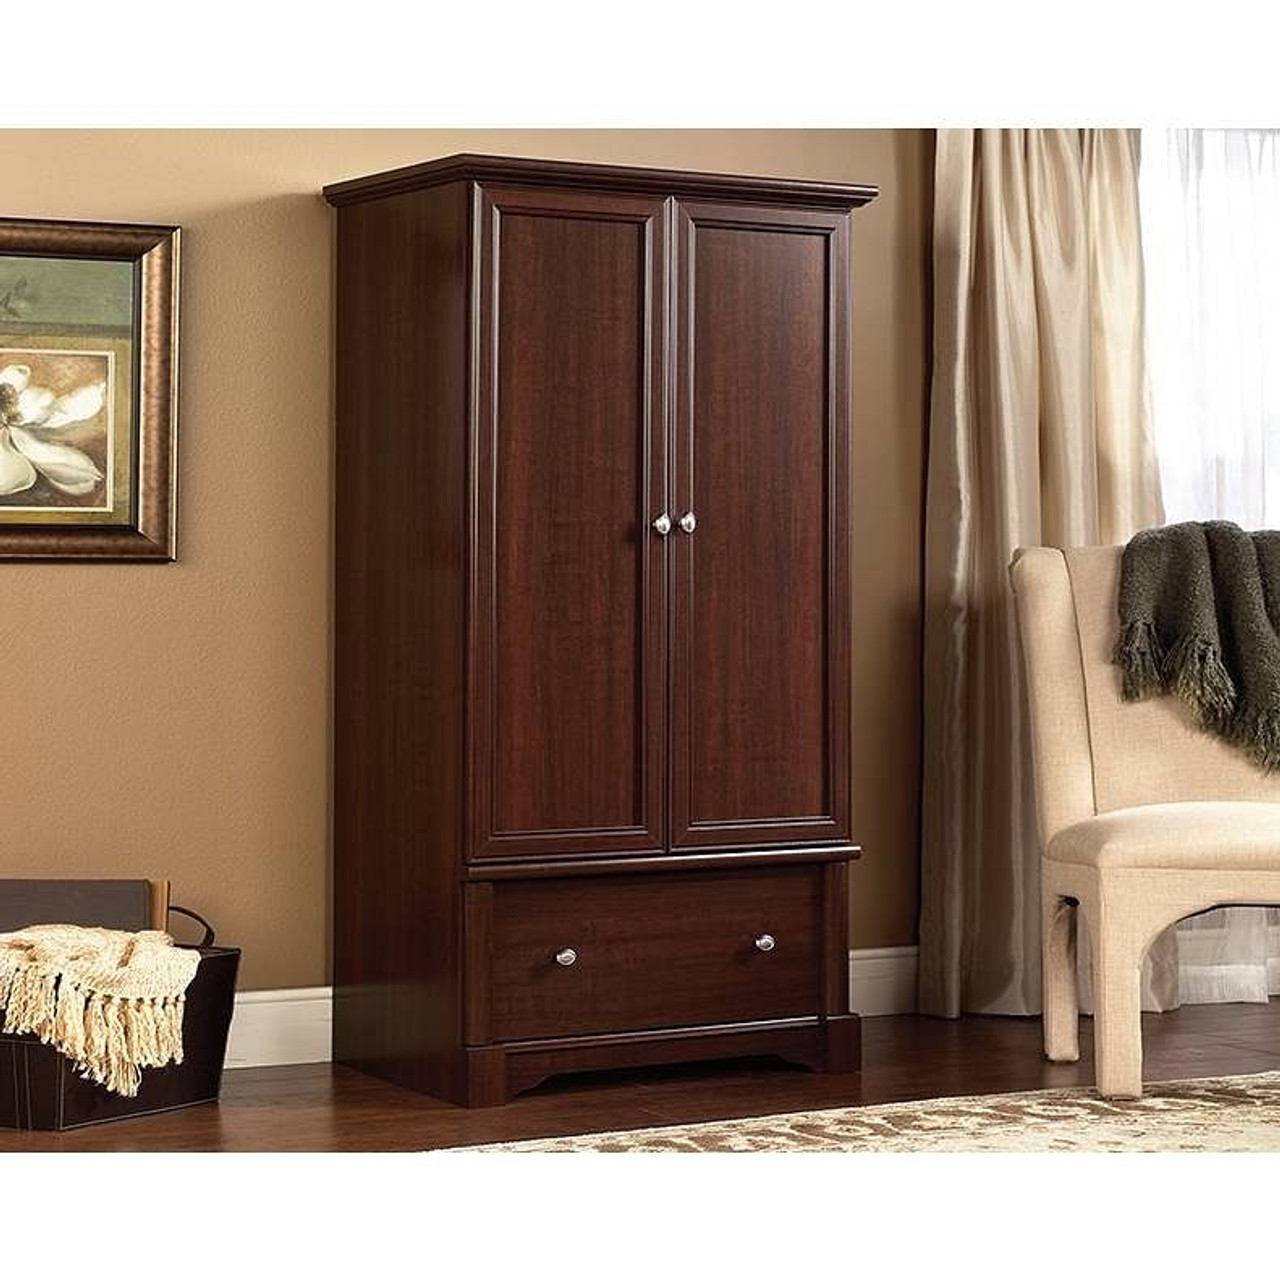 Rustic Cherry Drawer and Garment Rod Wardrobe Armoire